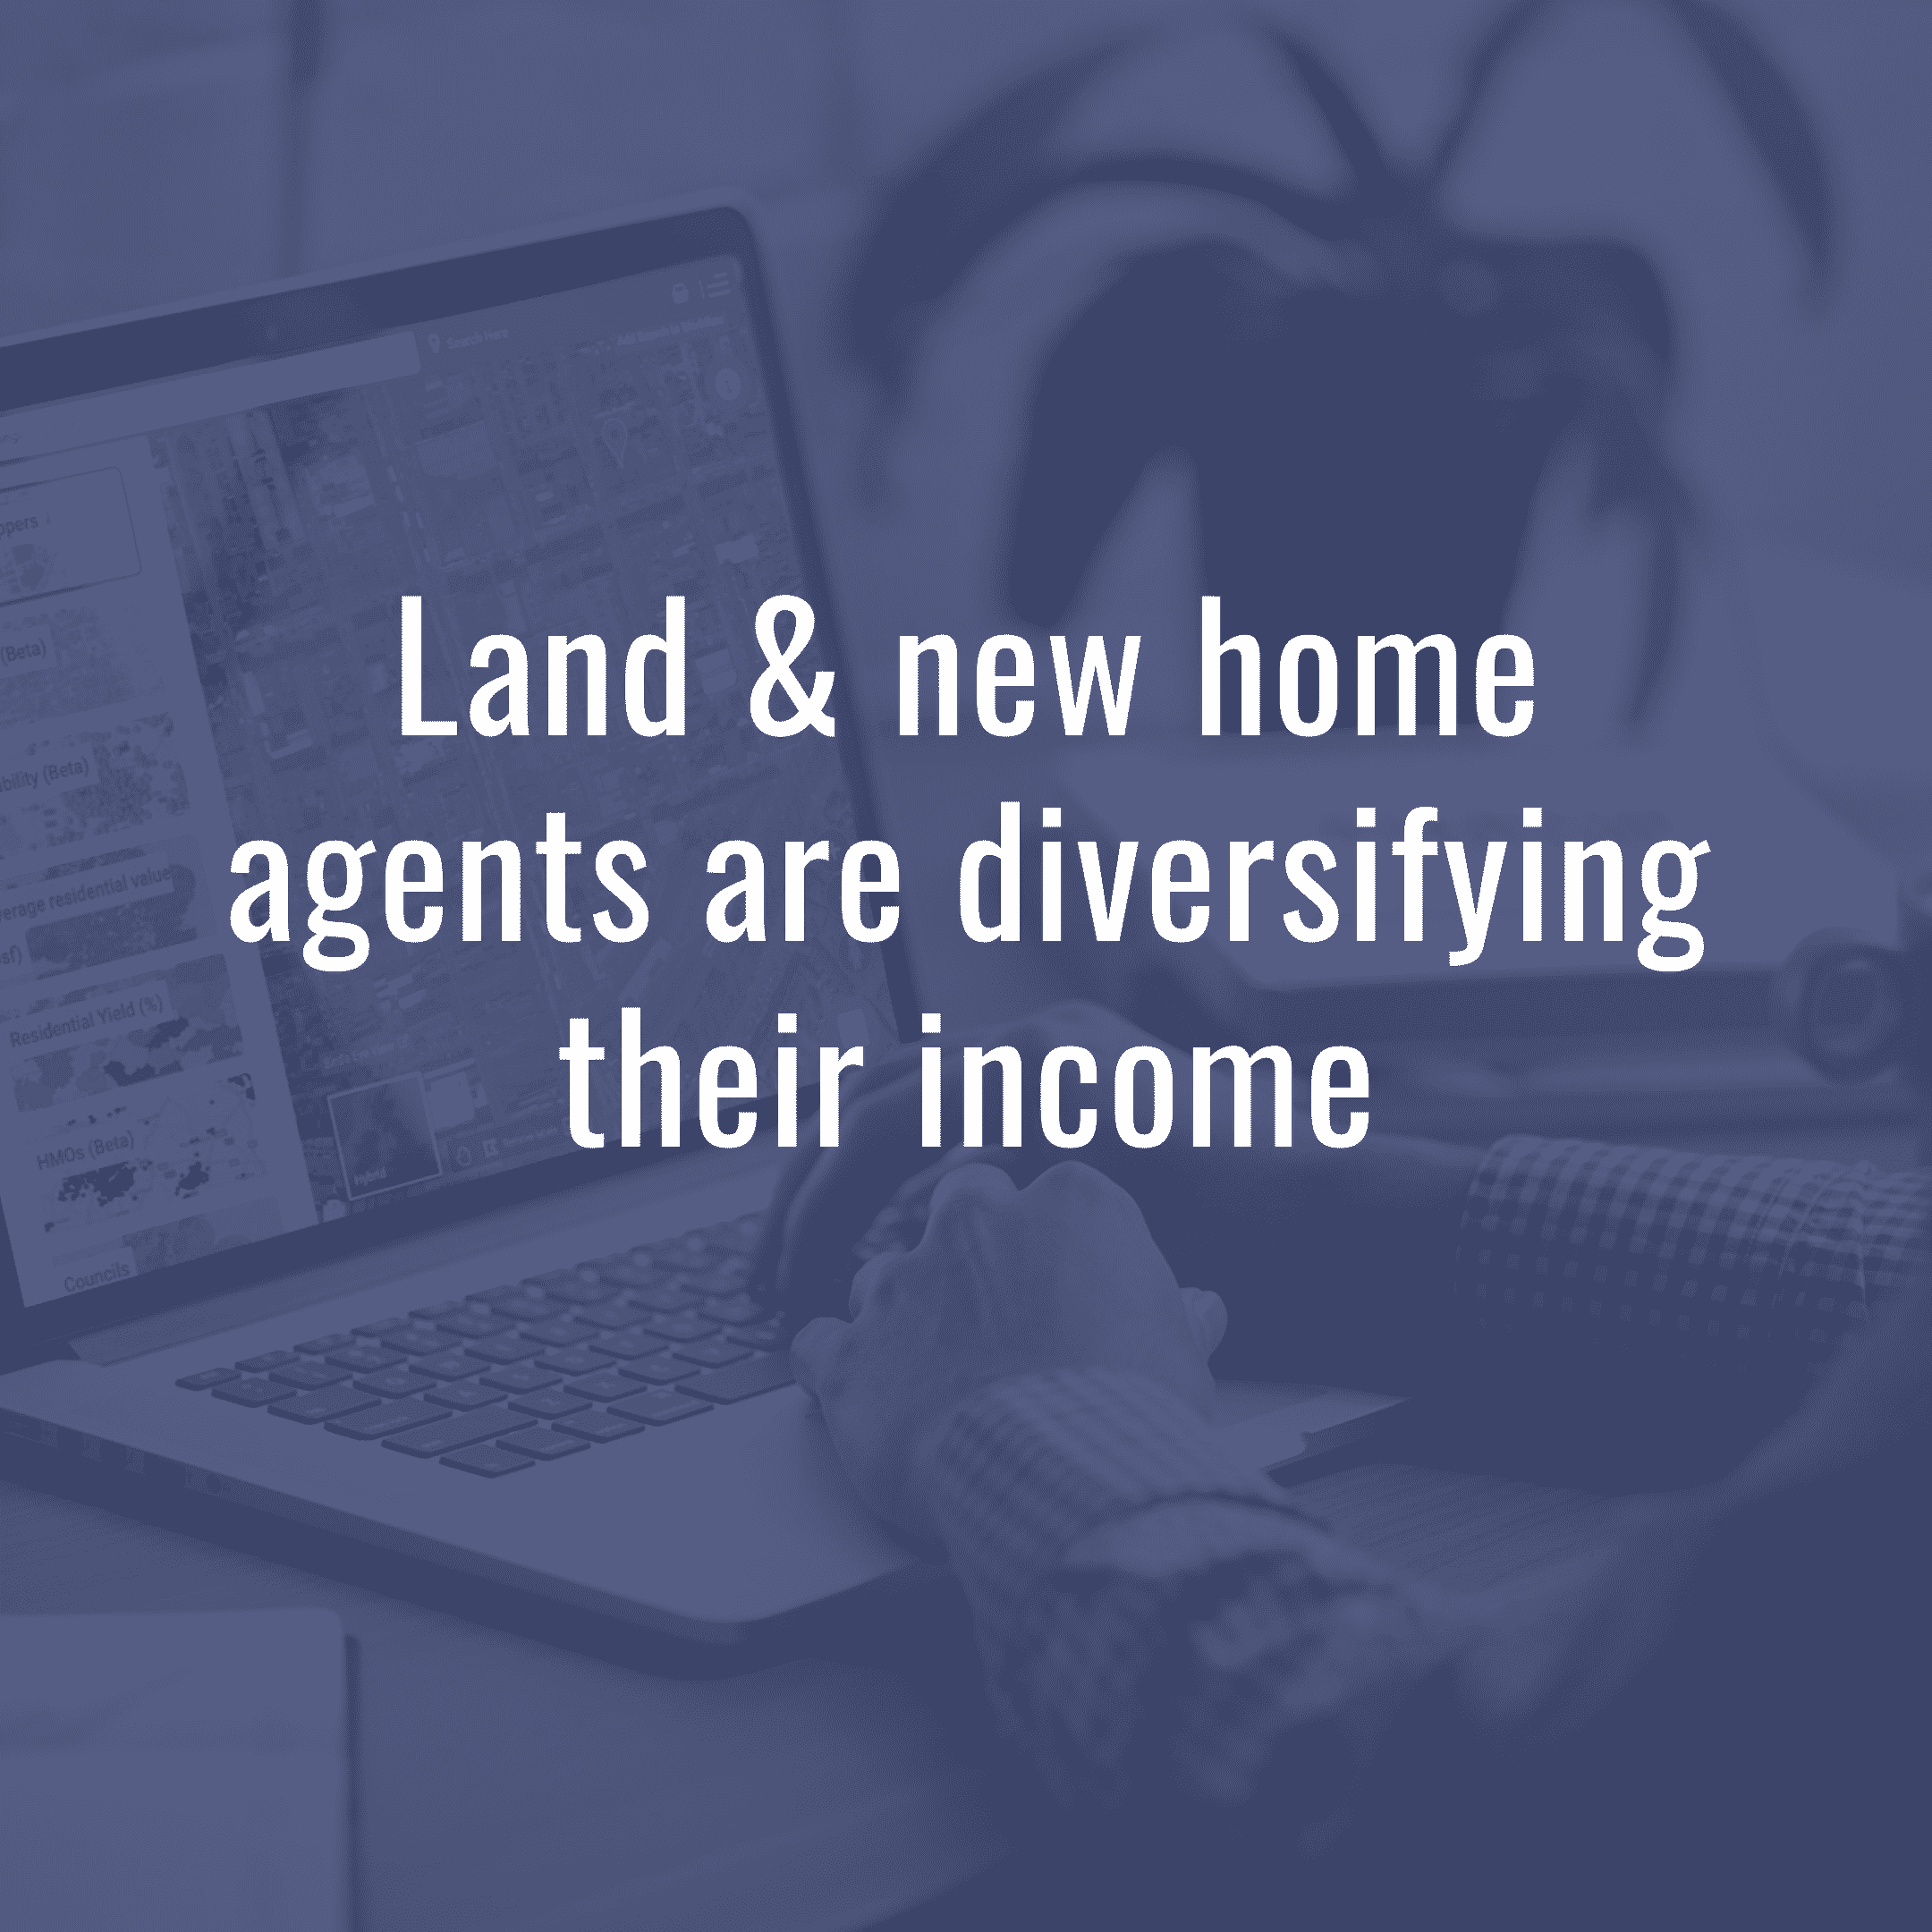 Land & new home agents are diversifying income